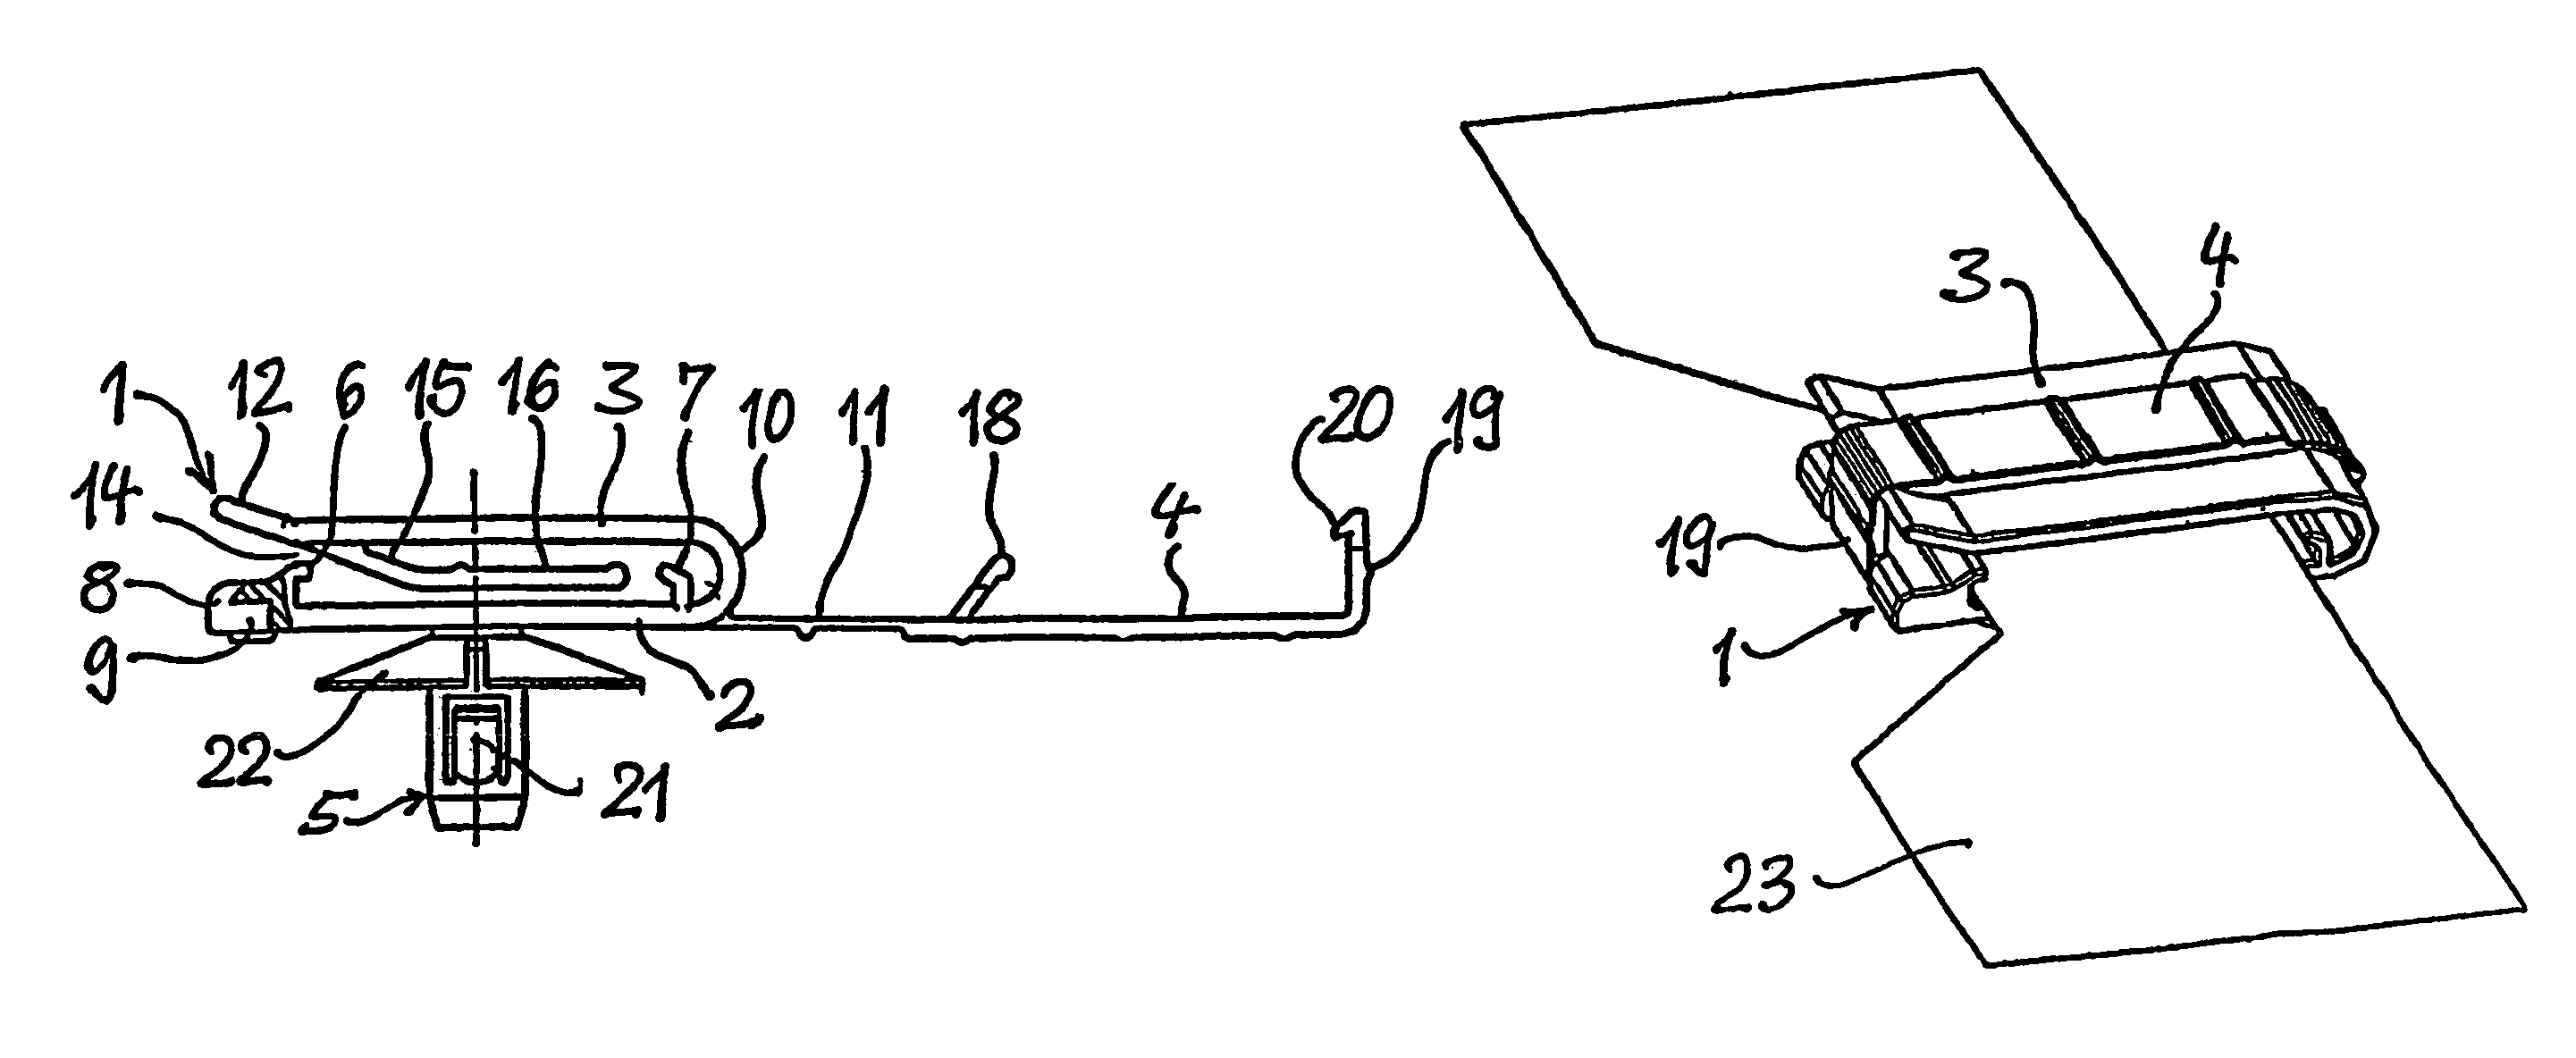 Clamp for holding of flat objects